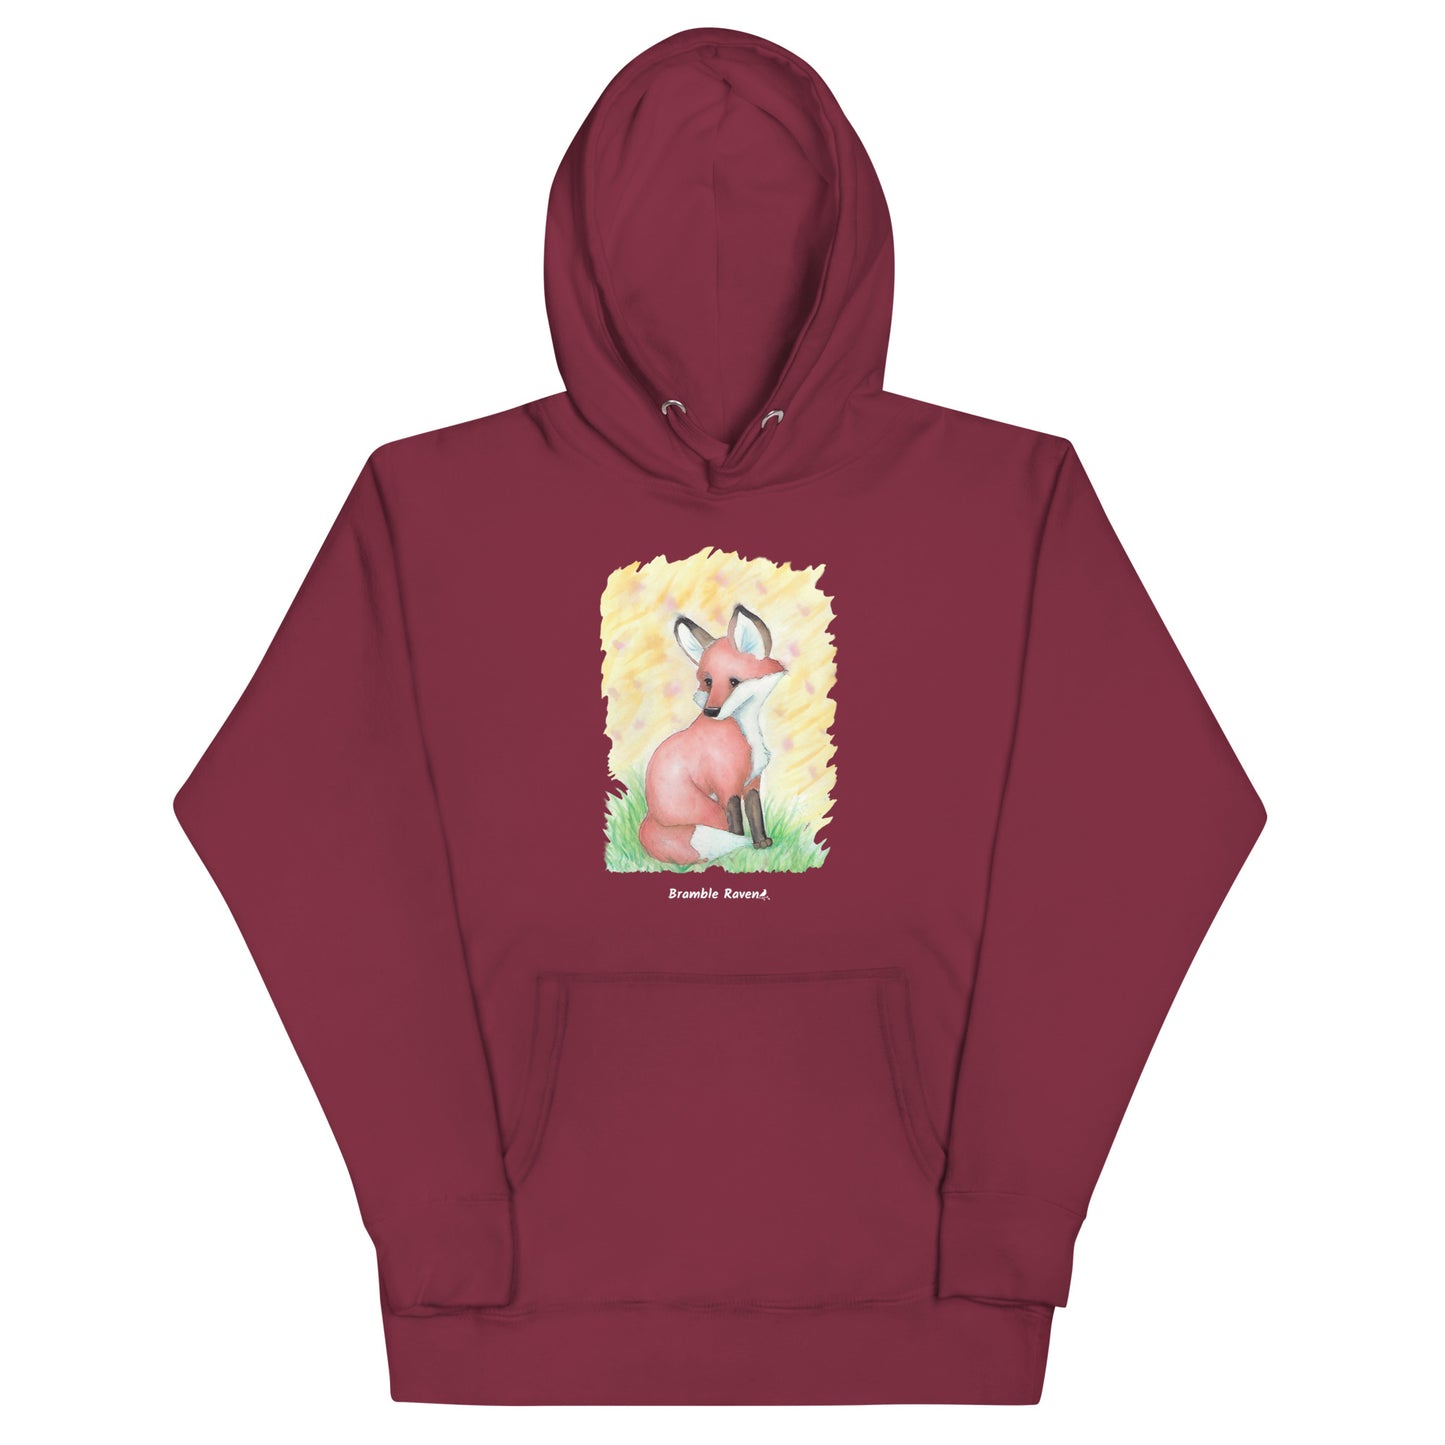 Unisex maroon colored hoodie. Features original watercolor painting of a fox in the grass against a yellow backdrop.